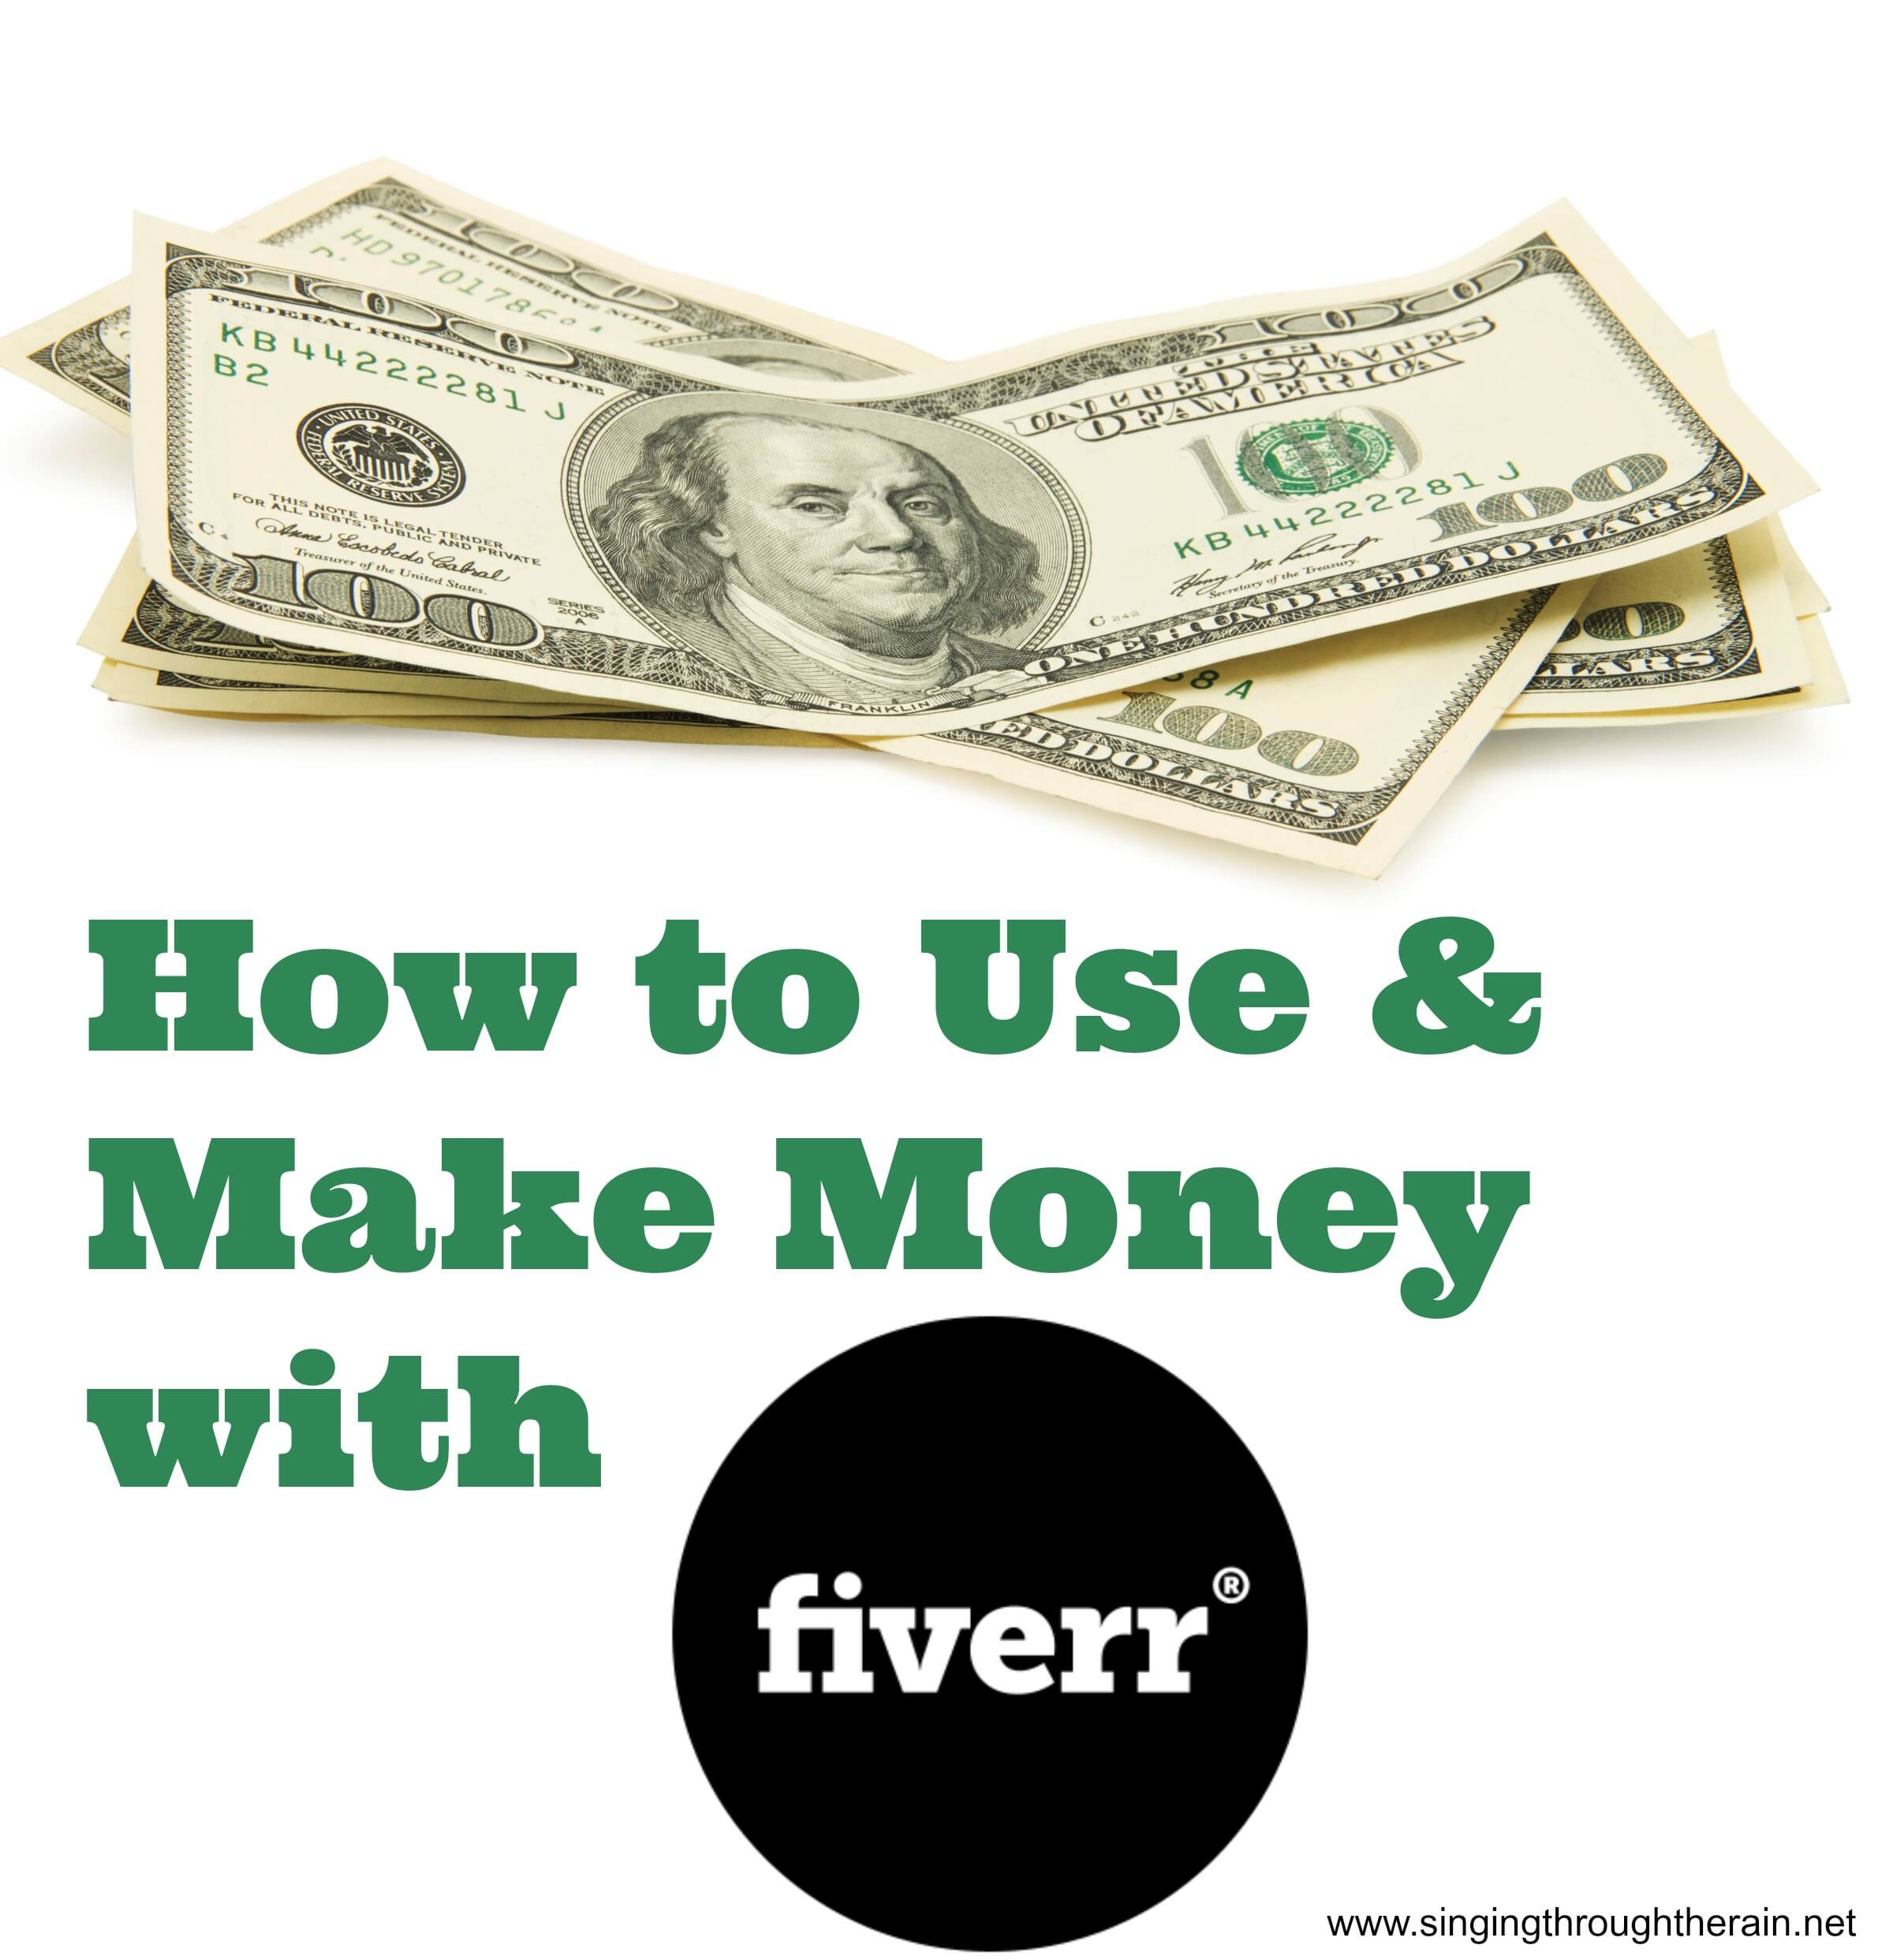 Fiverr: How to Use it and Make Money With it